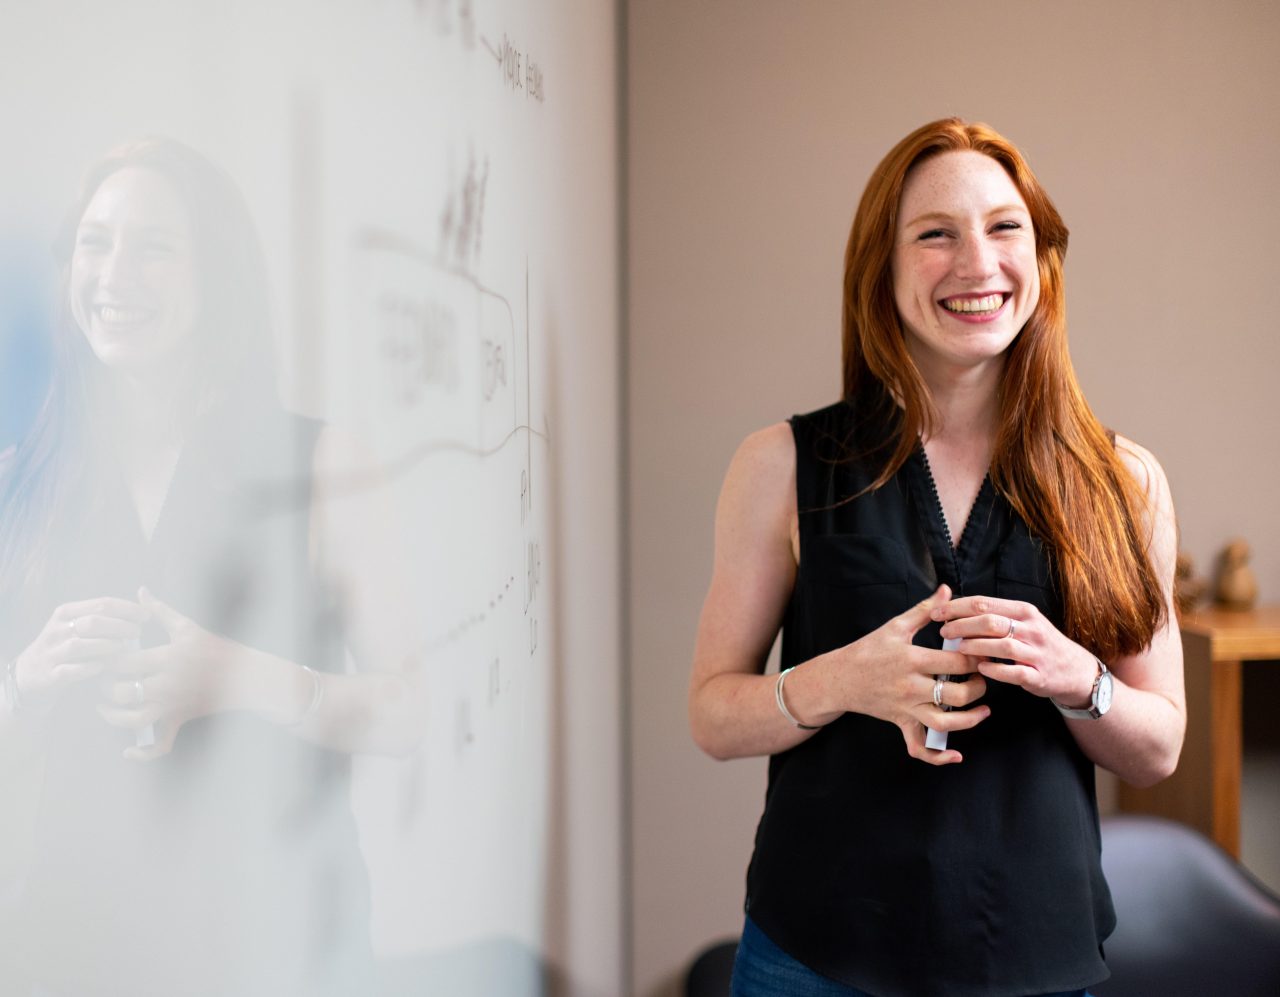 Woman with red hair and black top standing at a whiteboard